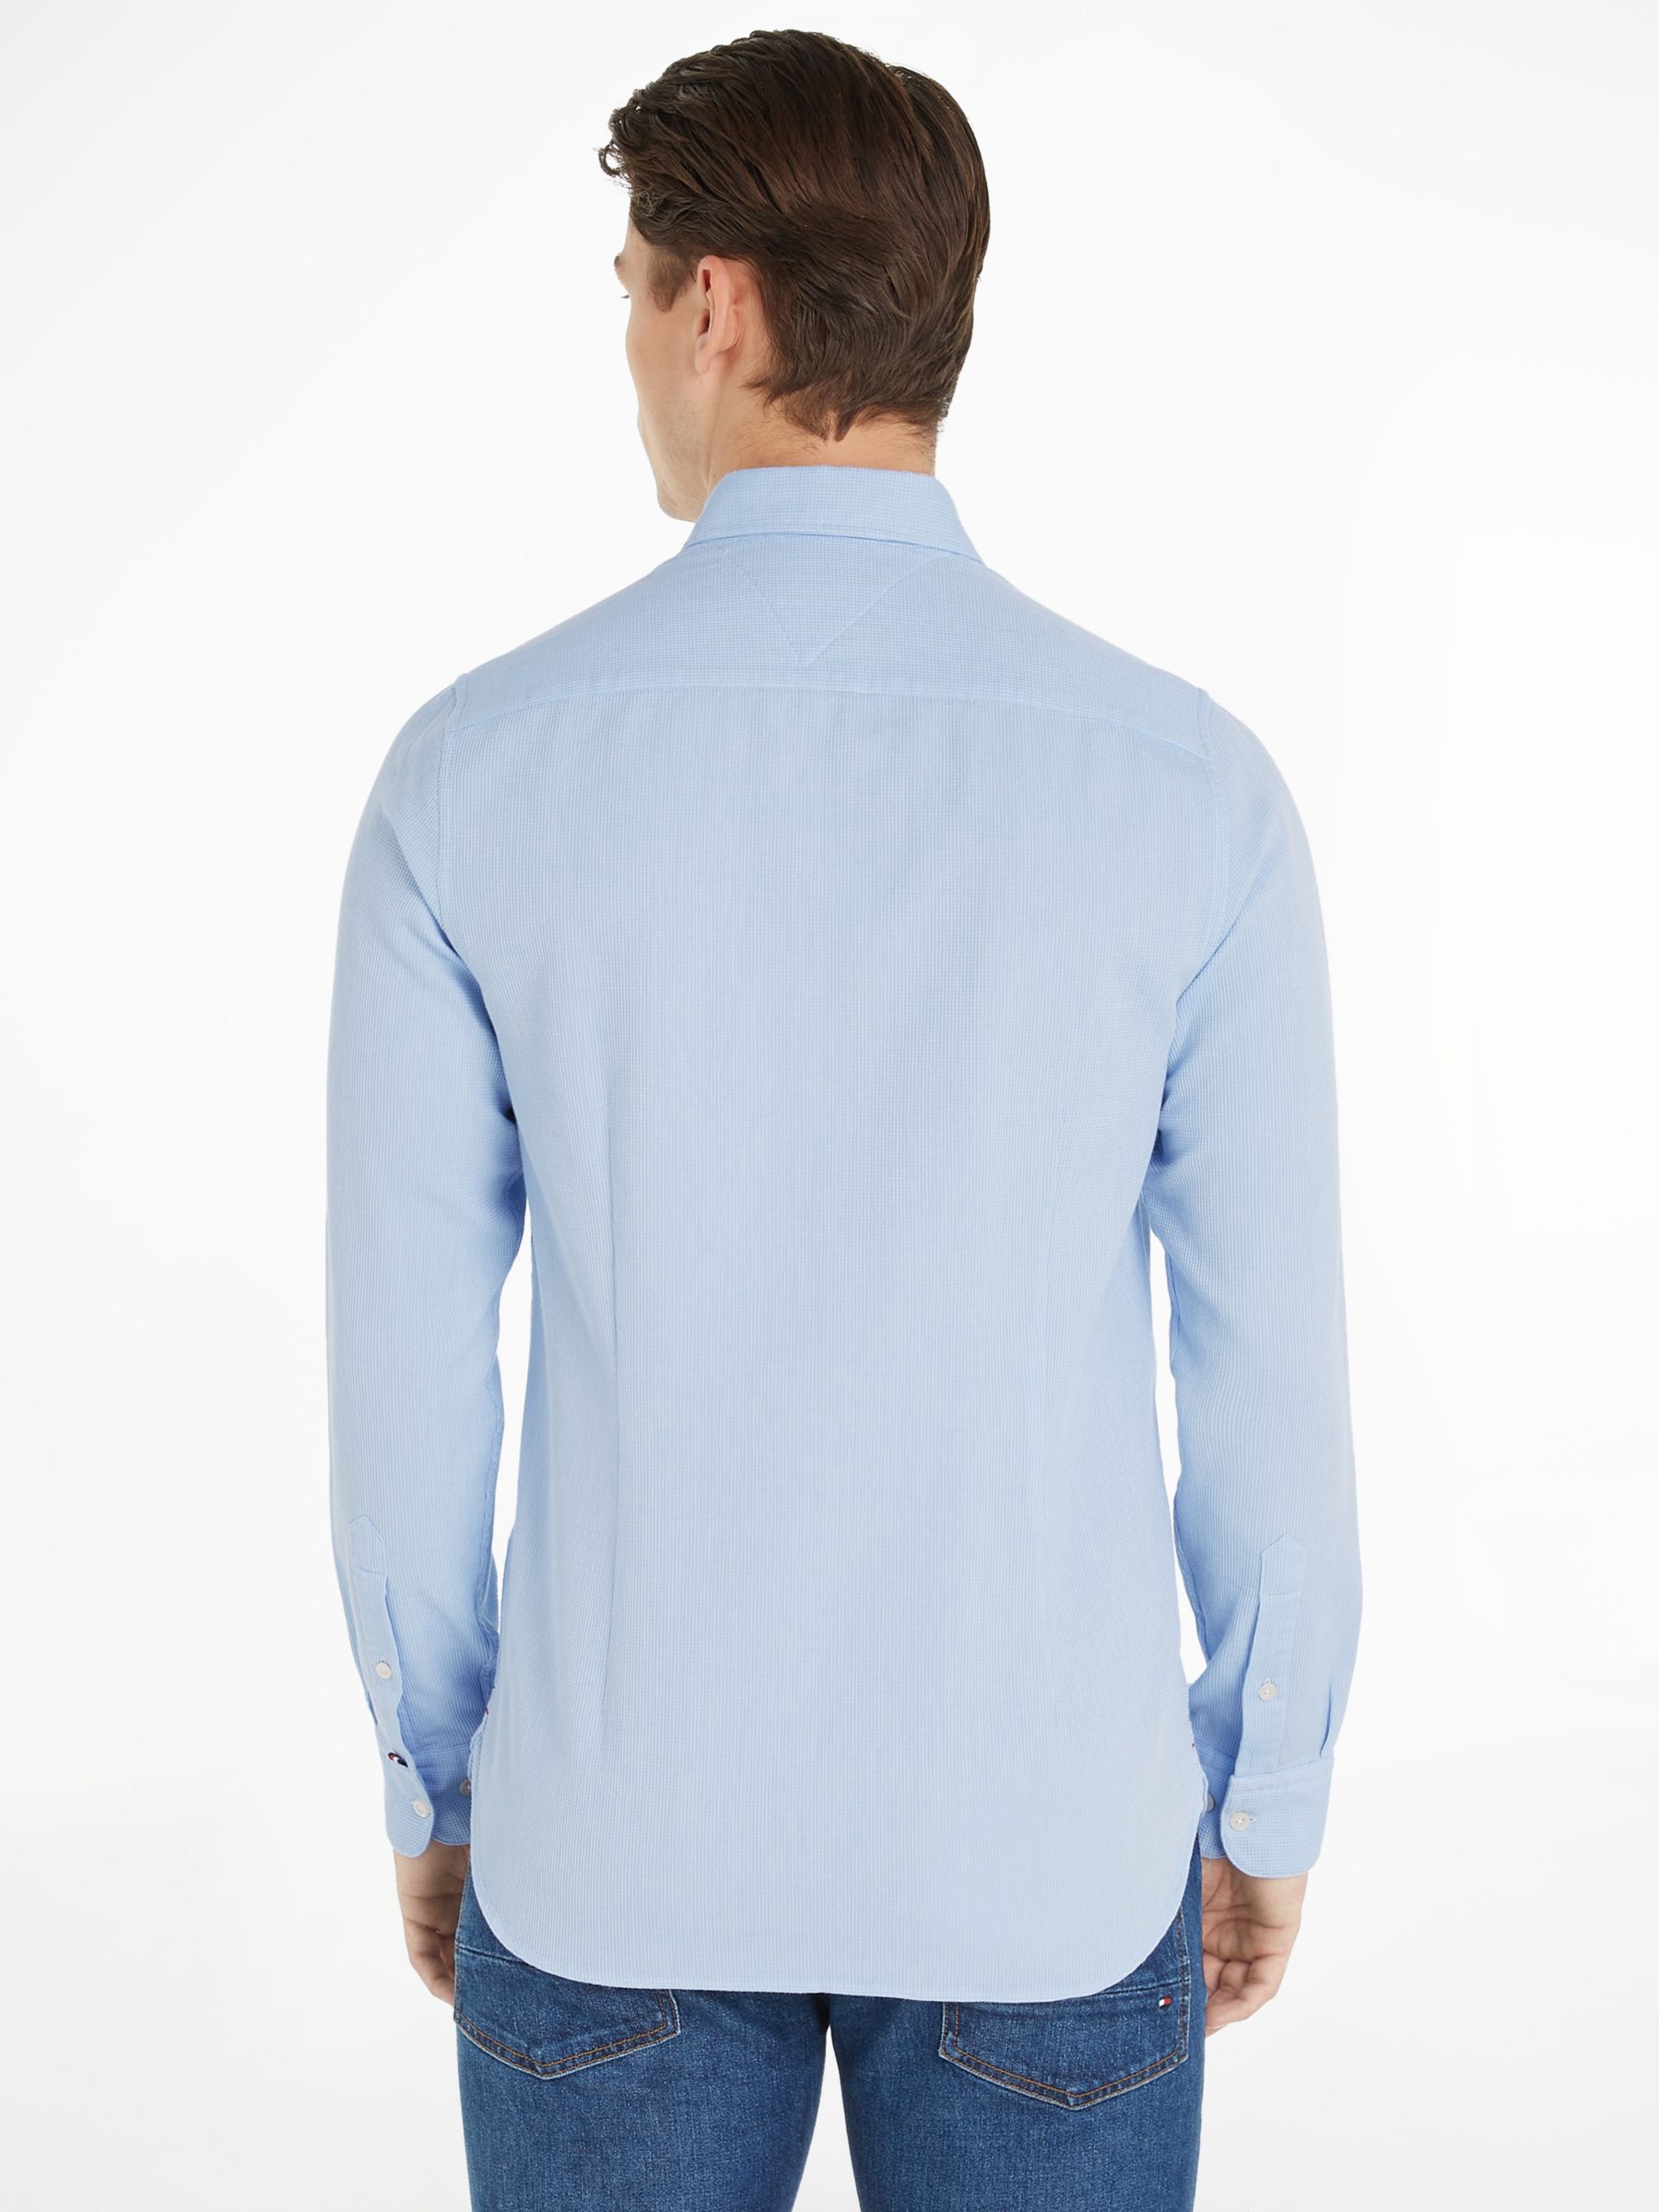 Tommy Hilfiger Dobby Slim Fit Shirt, Cloudy Blue at John Lewis & Partners